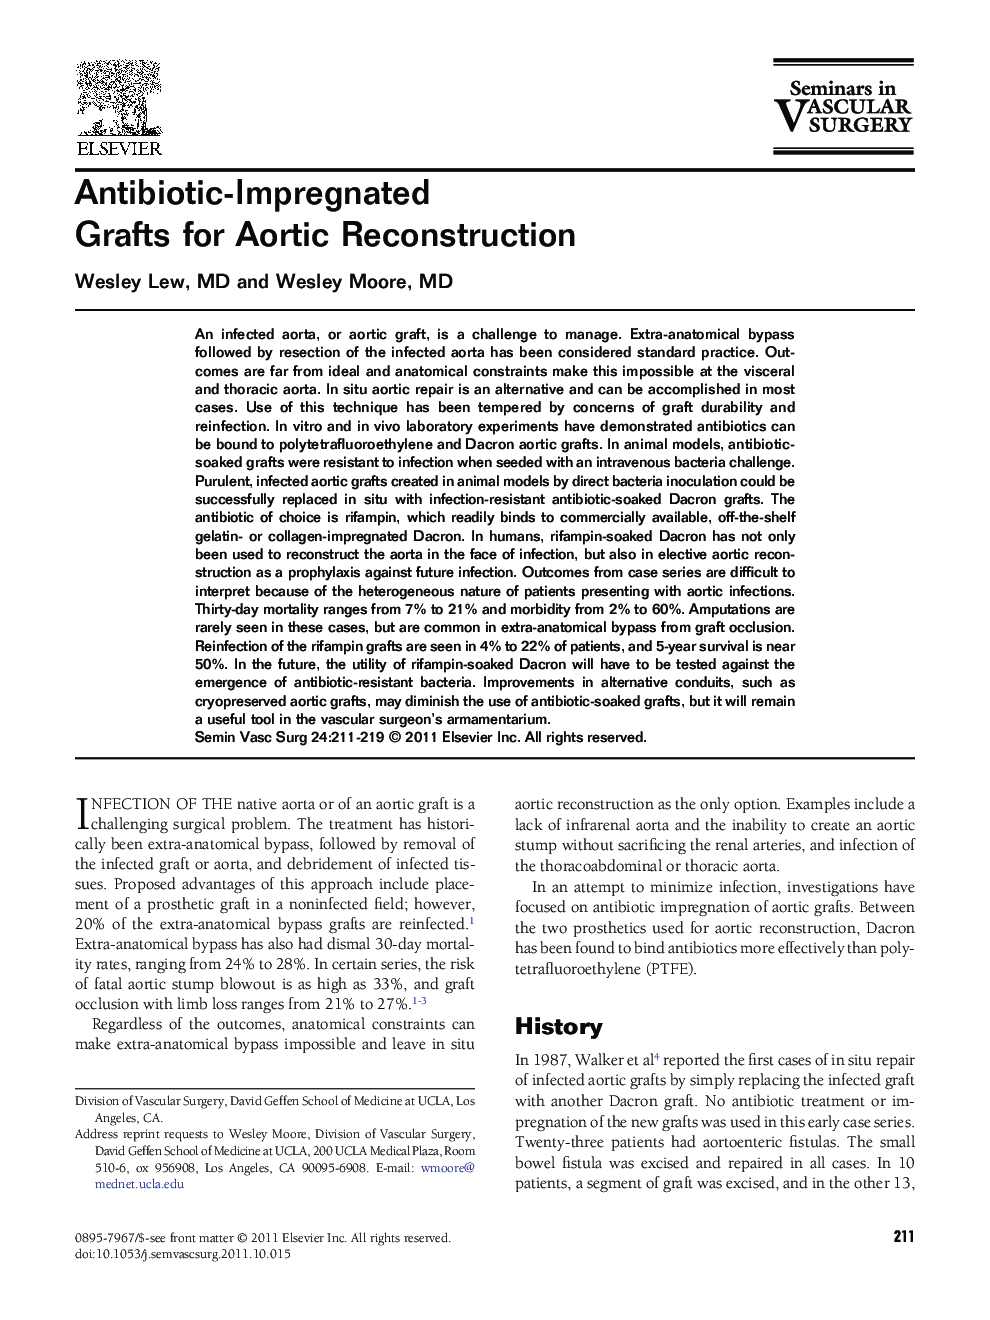 Antibiotic-Impregnated Grafts for Aortic Reconstruction